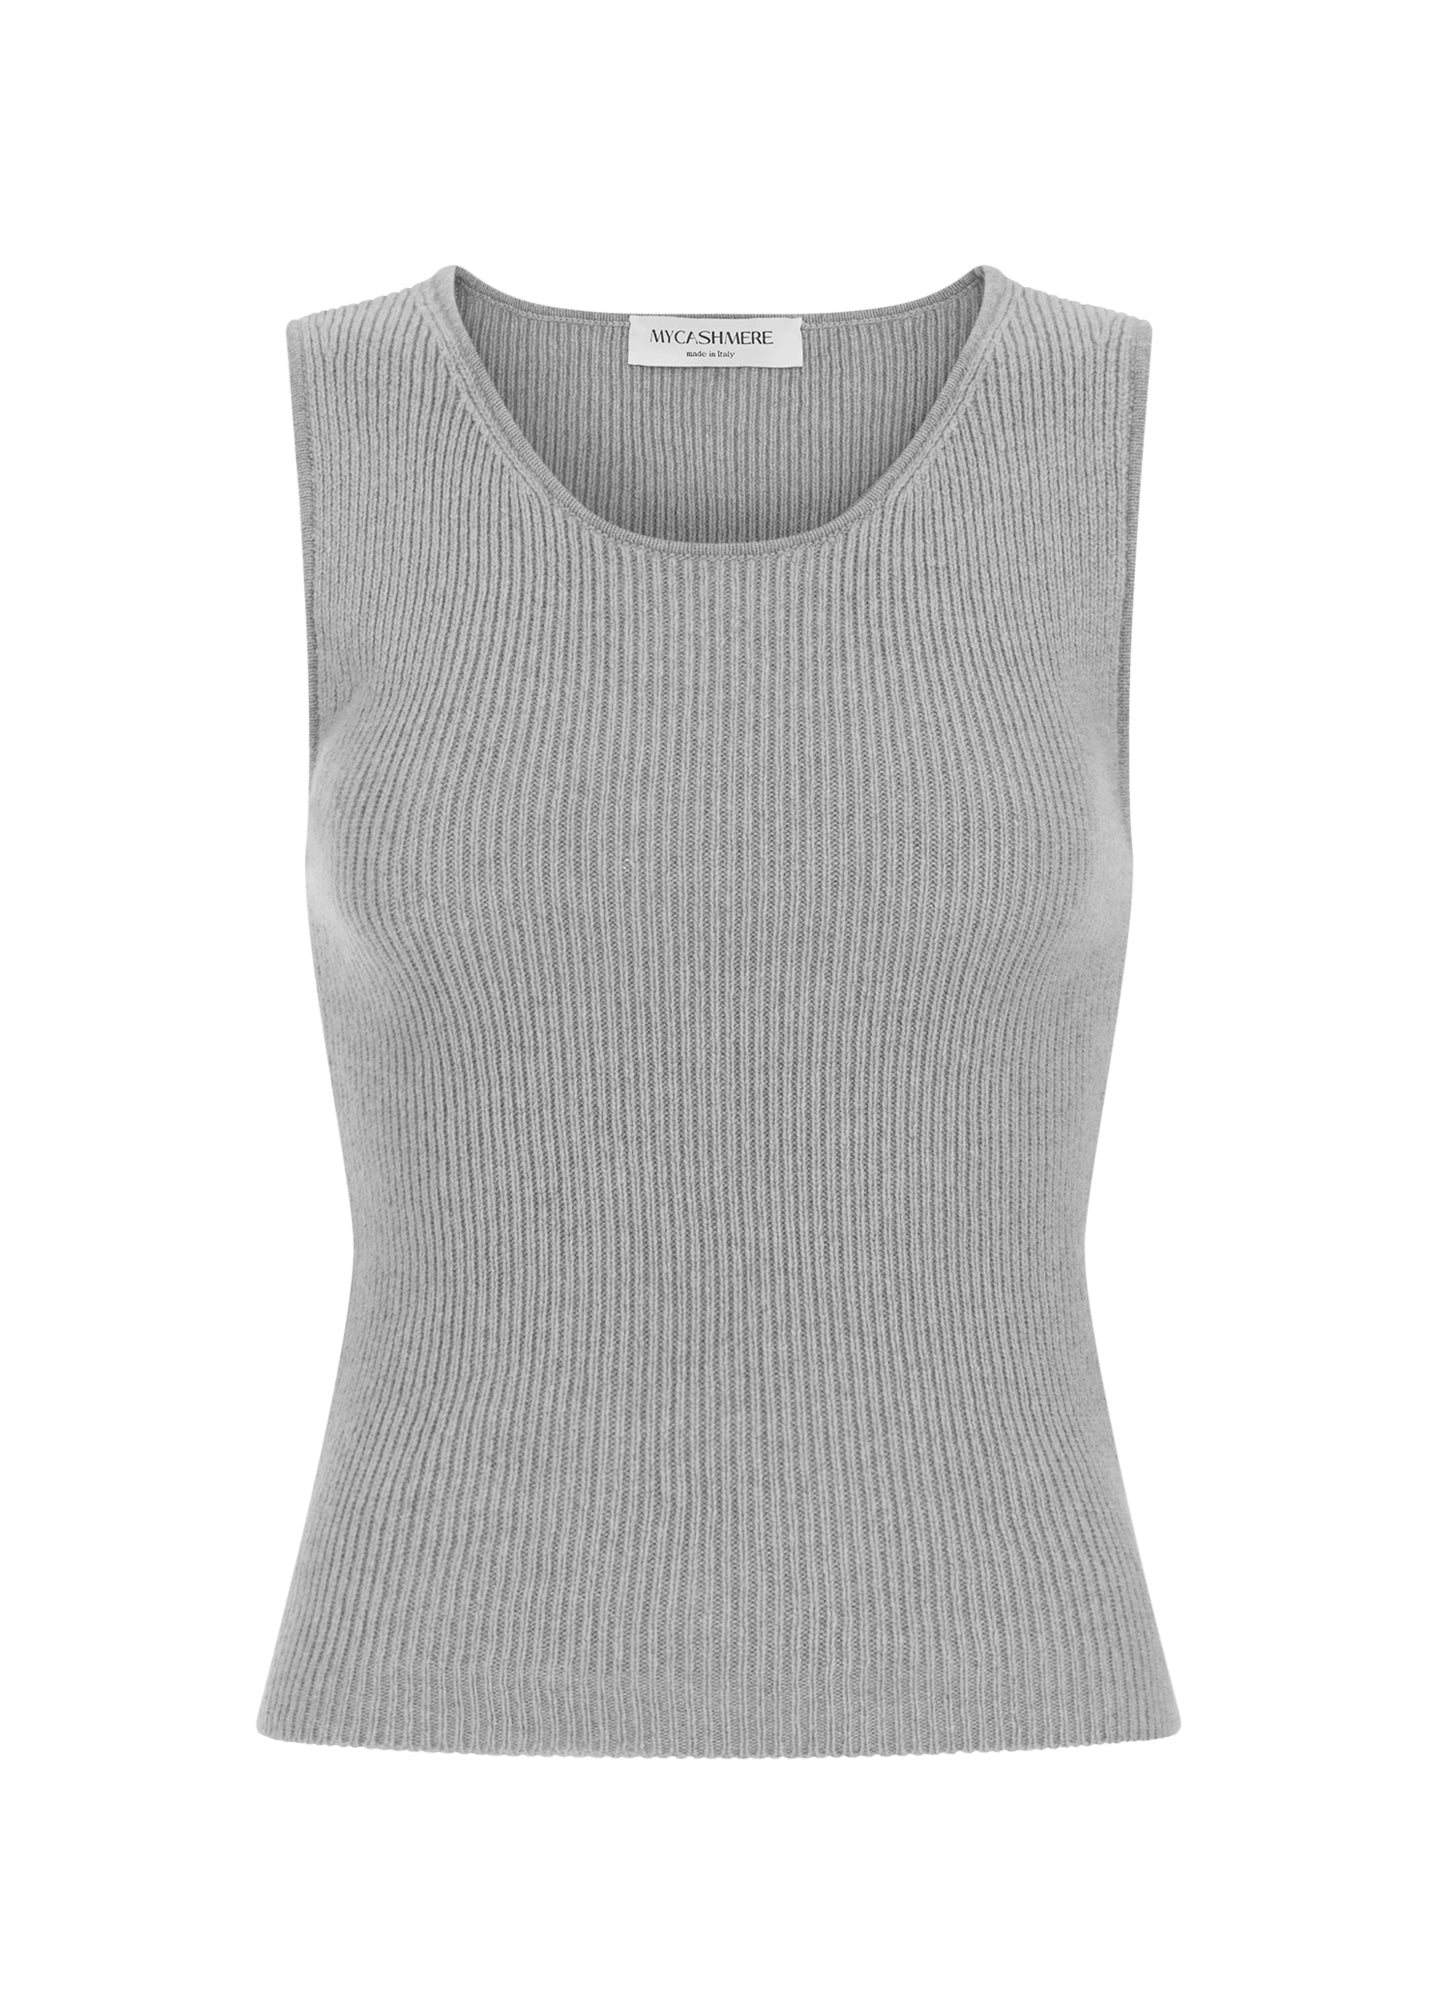 Designer ribbed cashmere tank top in grey